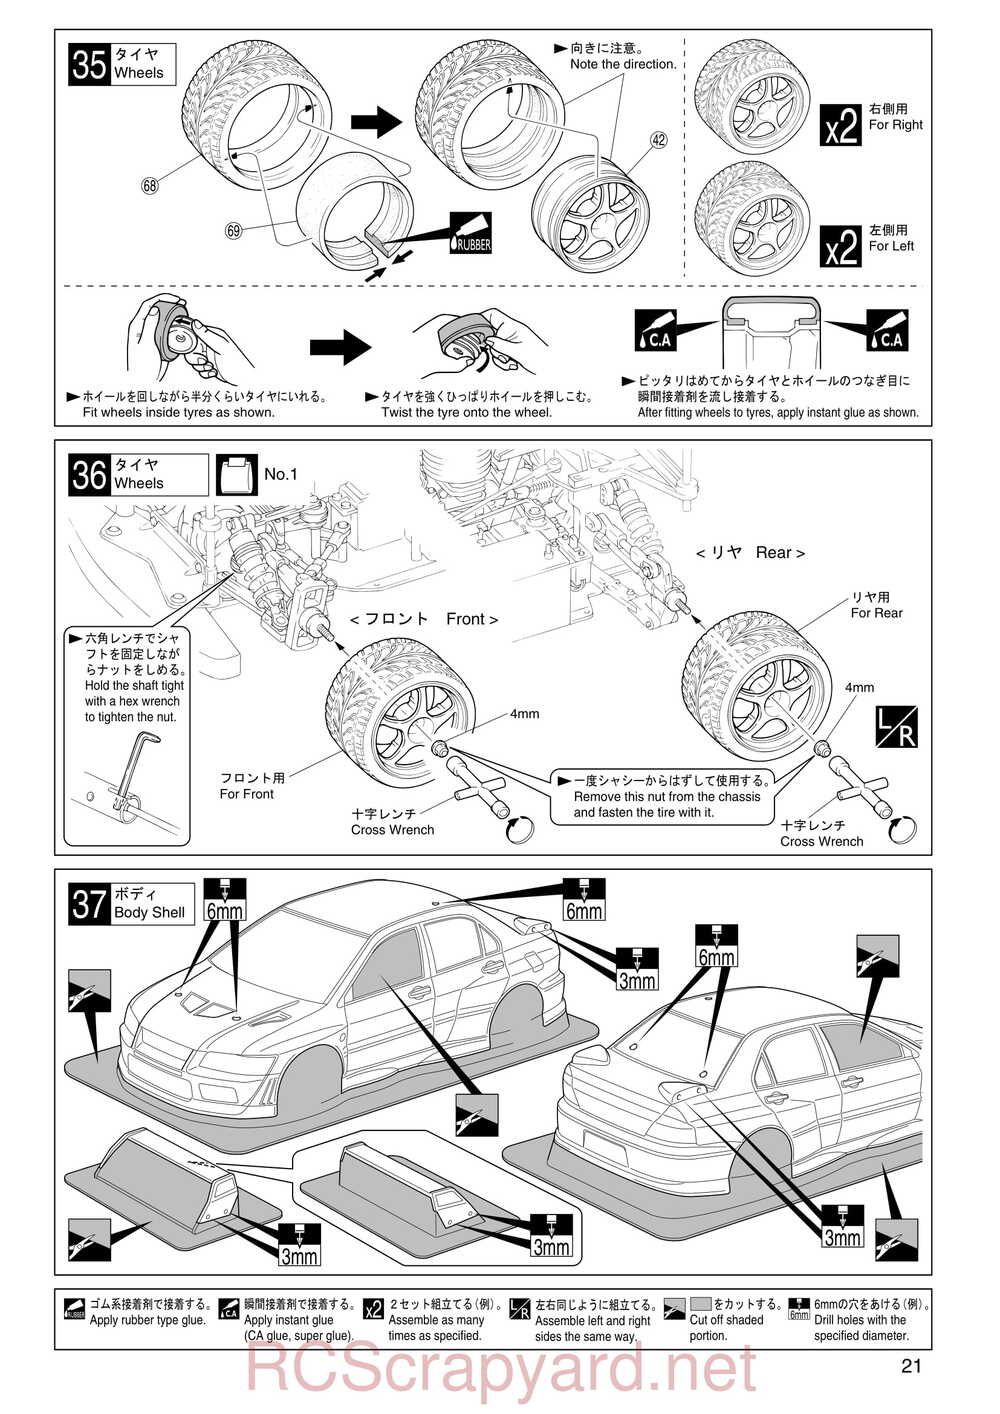 Kyosho - 31061 - TR-15 Rally - Manual - Page 21